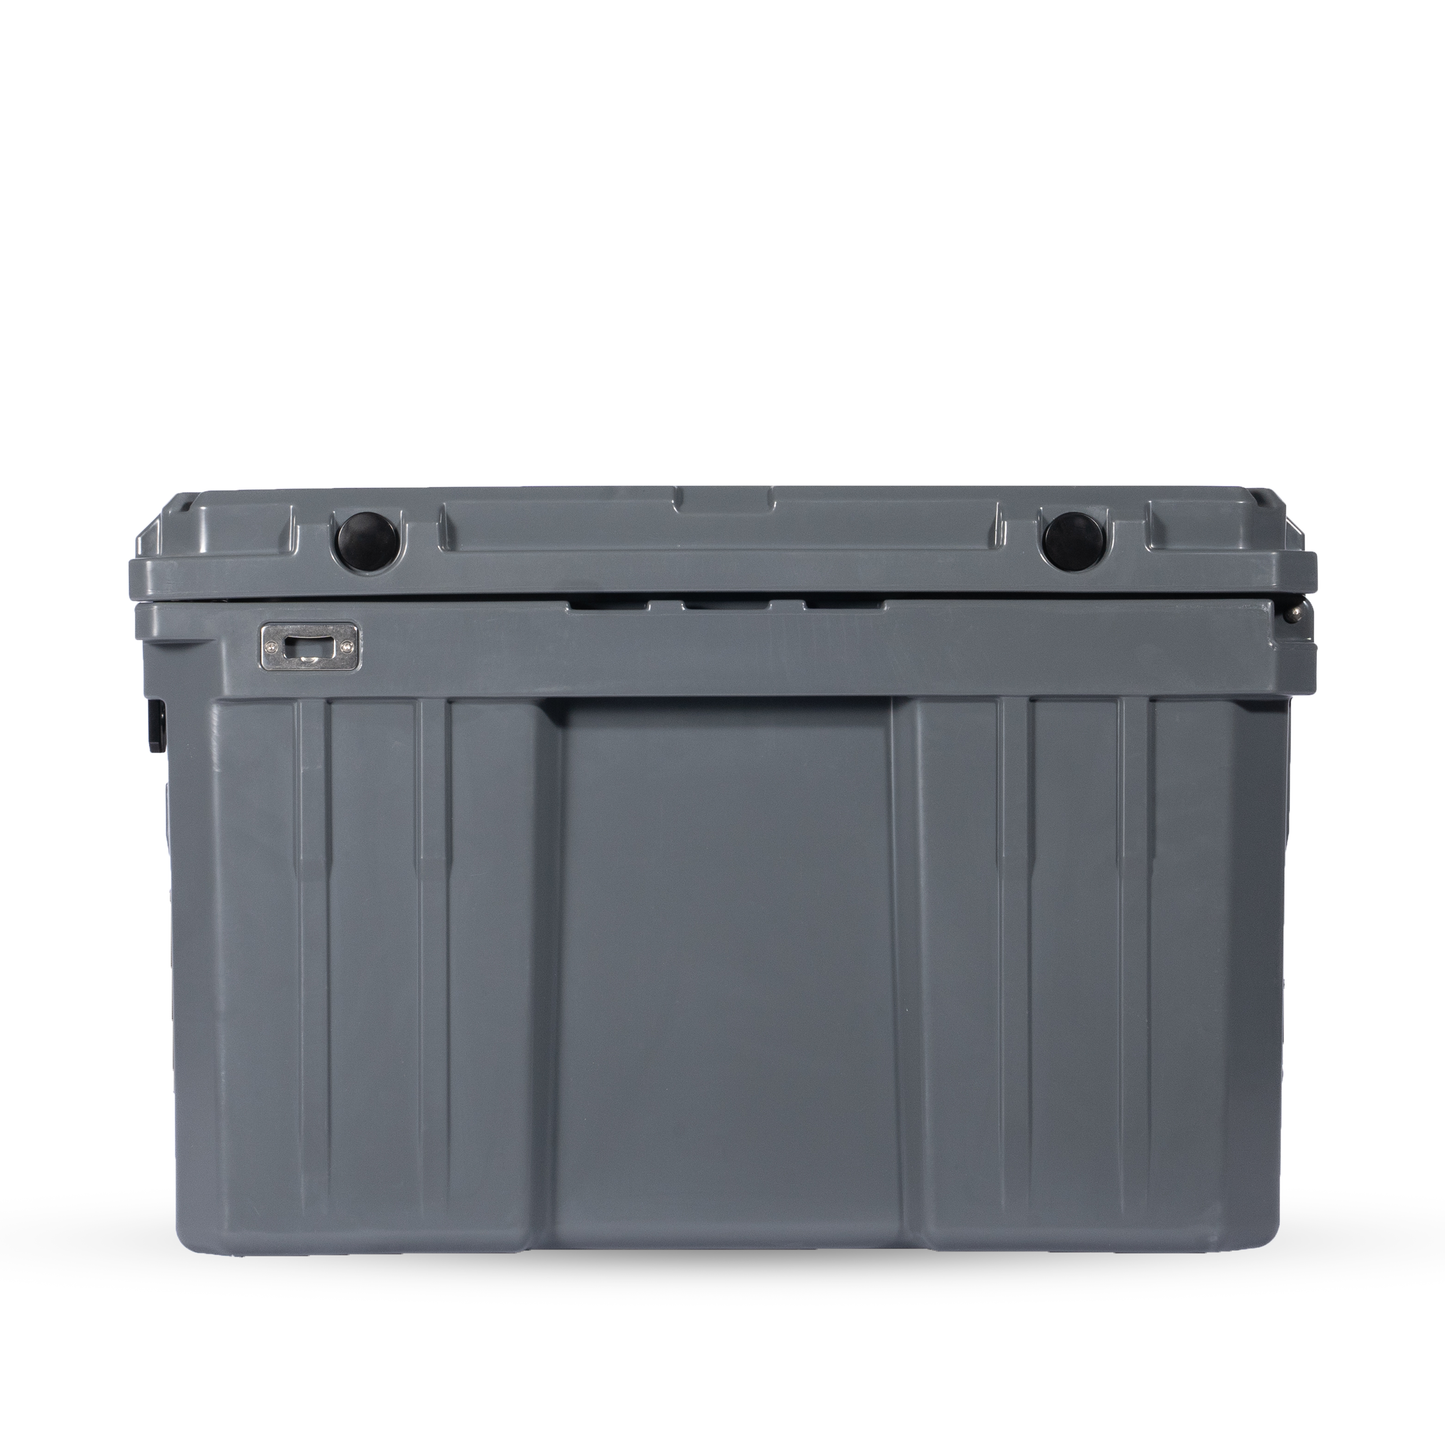 45QT End-Opening Rugged Cooler by ROAM Adventure Co.